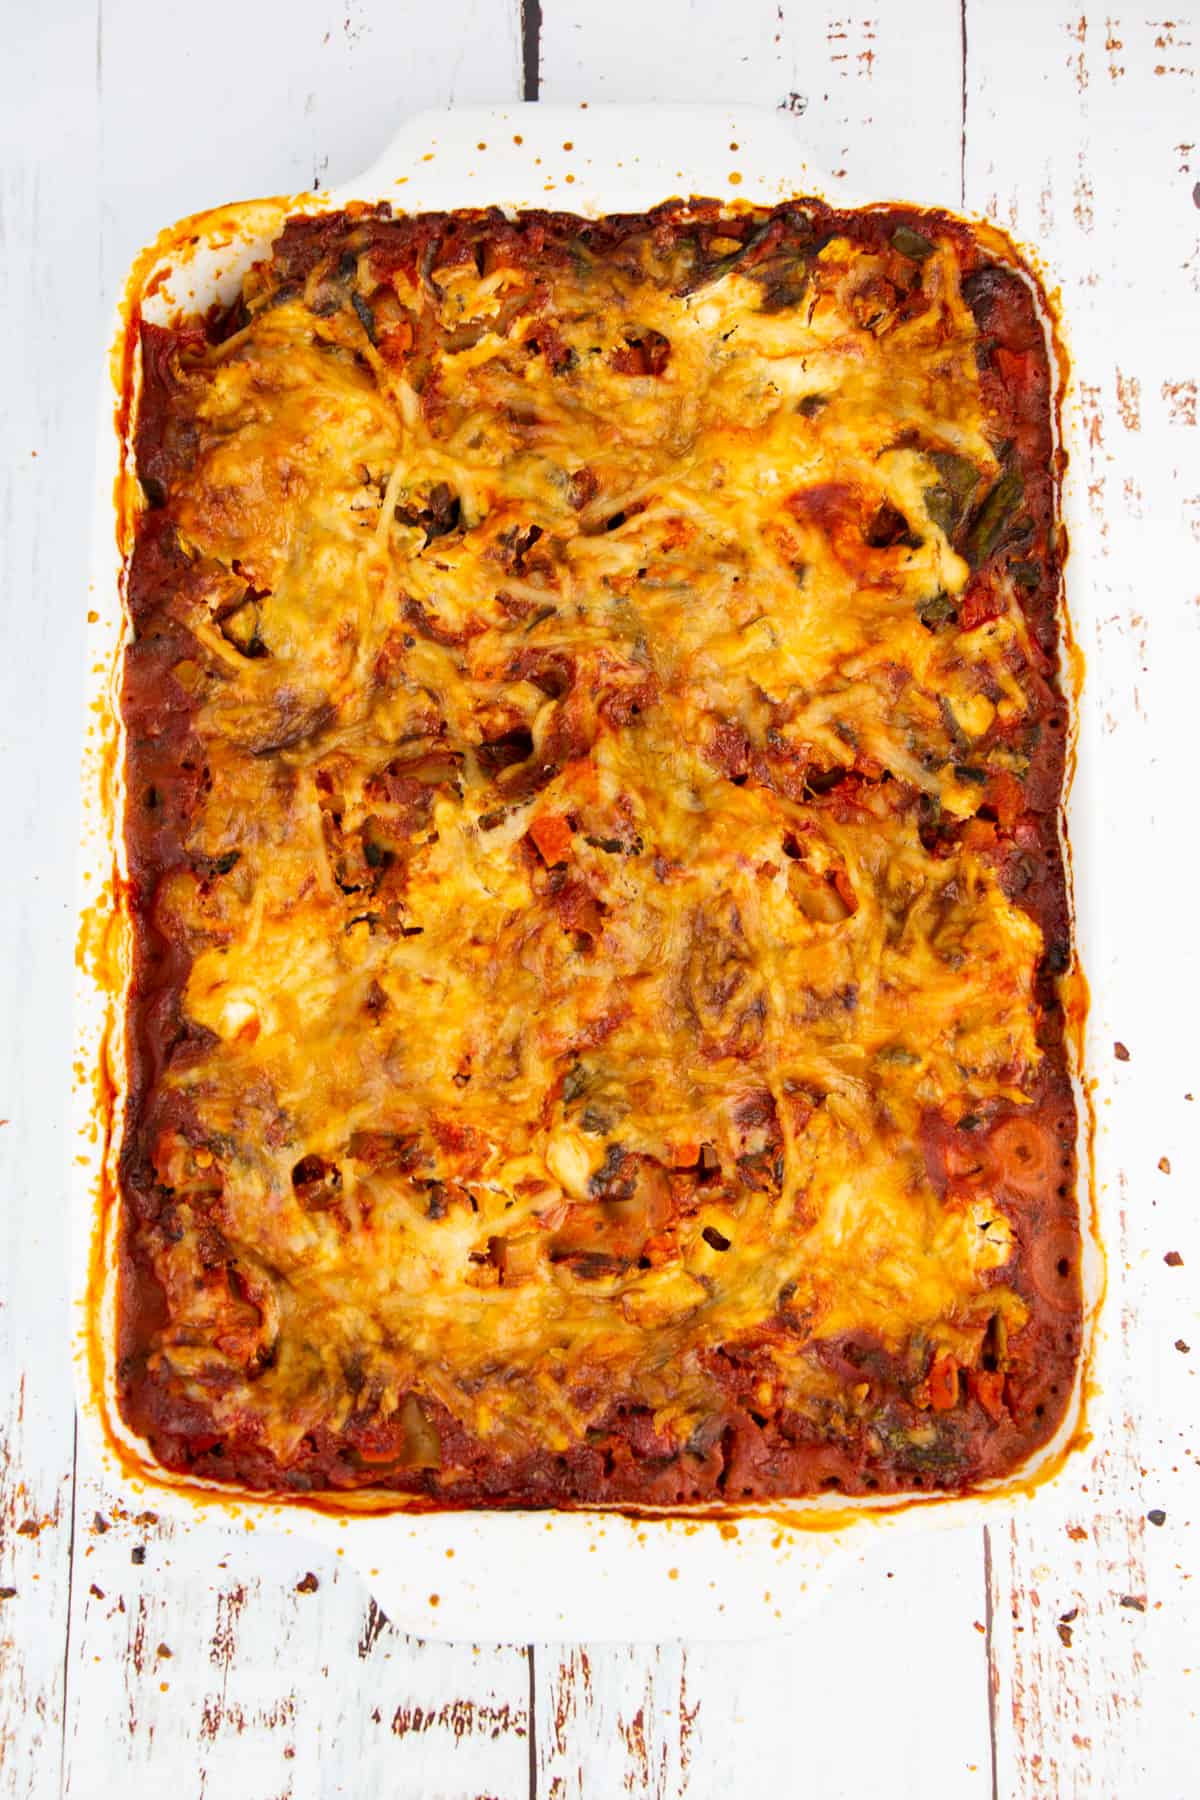 a vegetable lasagna fresh out of the oven on a wooden board